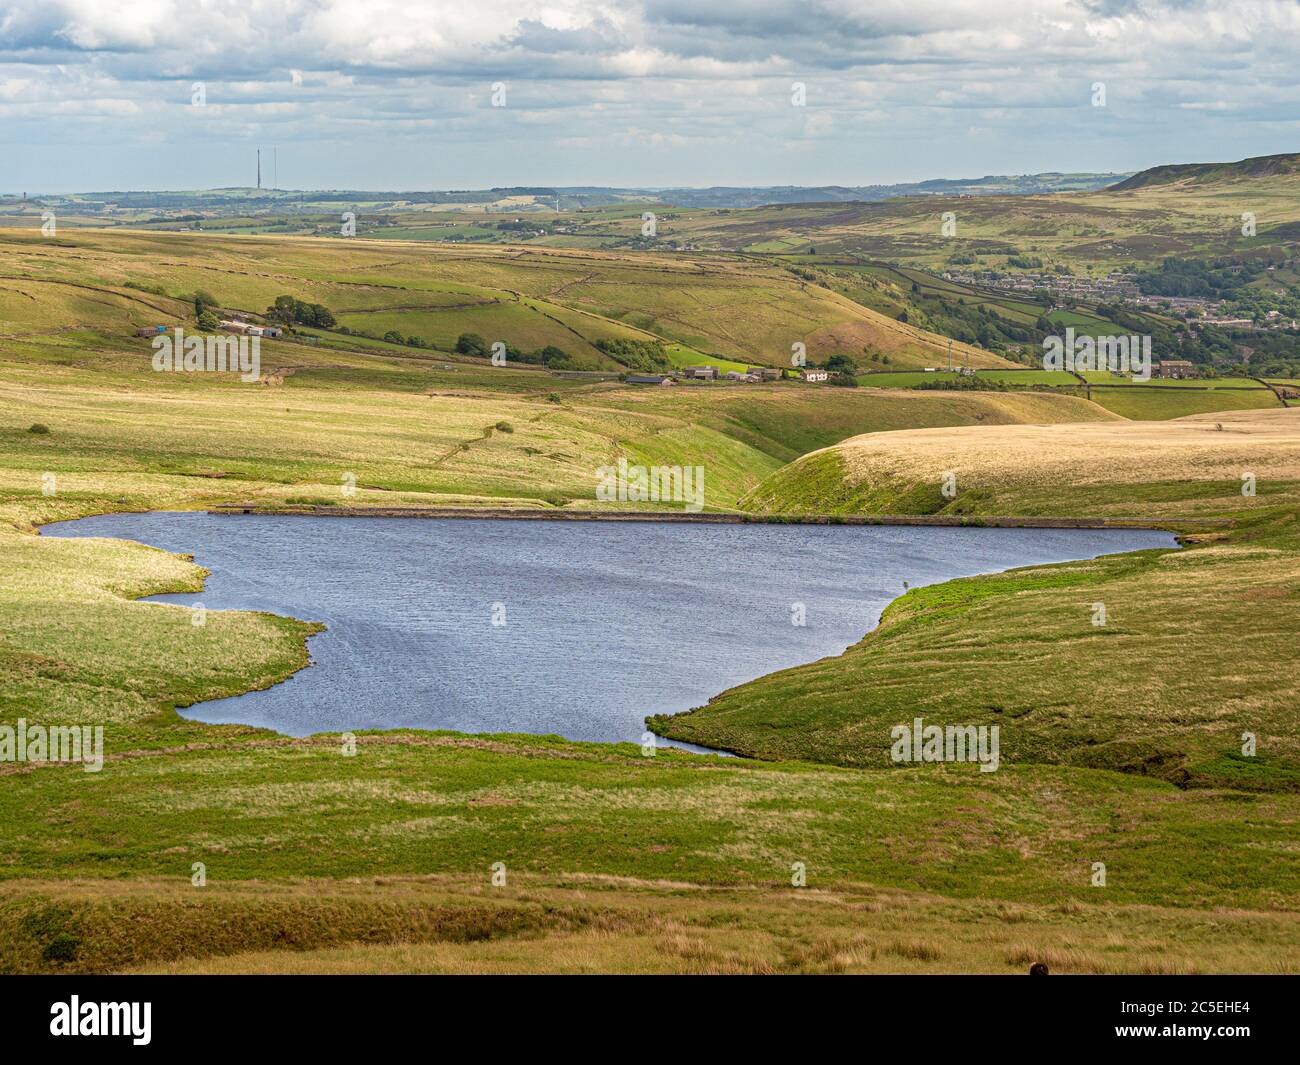 March Haigh Reservoir, looking towards Marsden with the Emley Moor transmitter in the distance. Huddersfield. UK Stock Photo